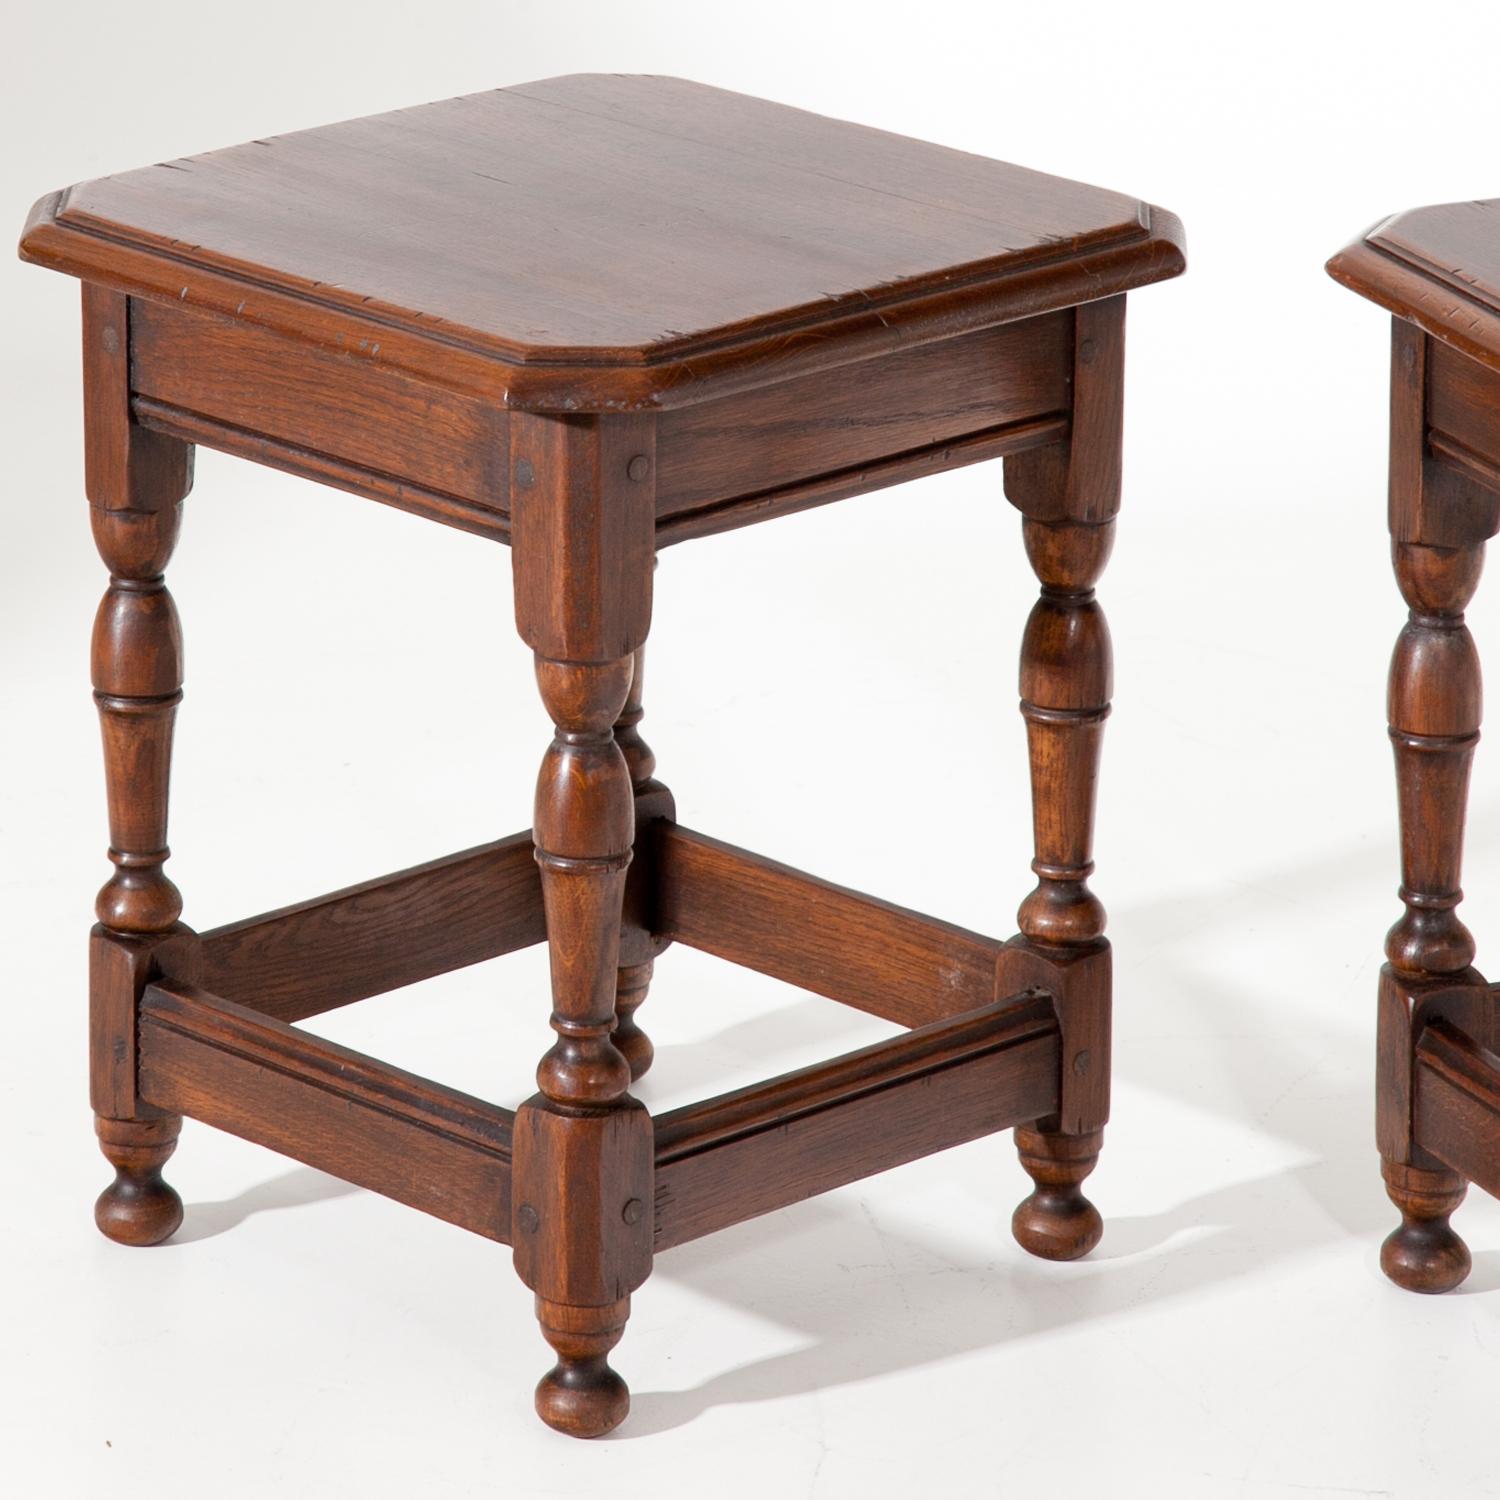 Oak Pair of Side Tables, 19th-20th Century